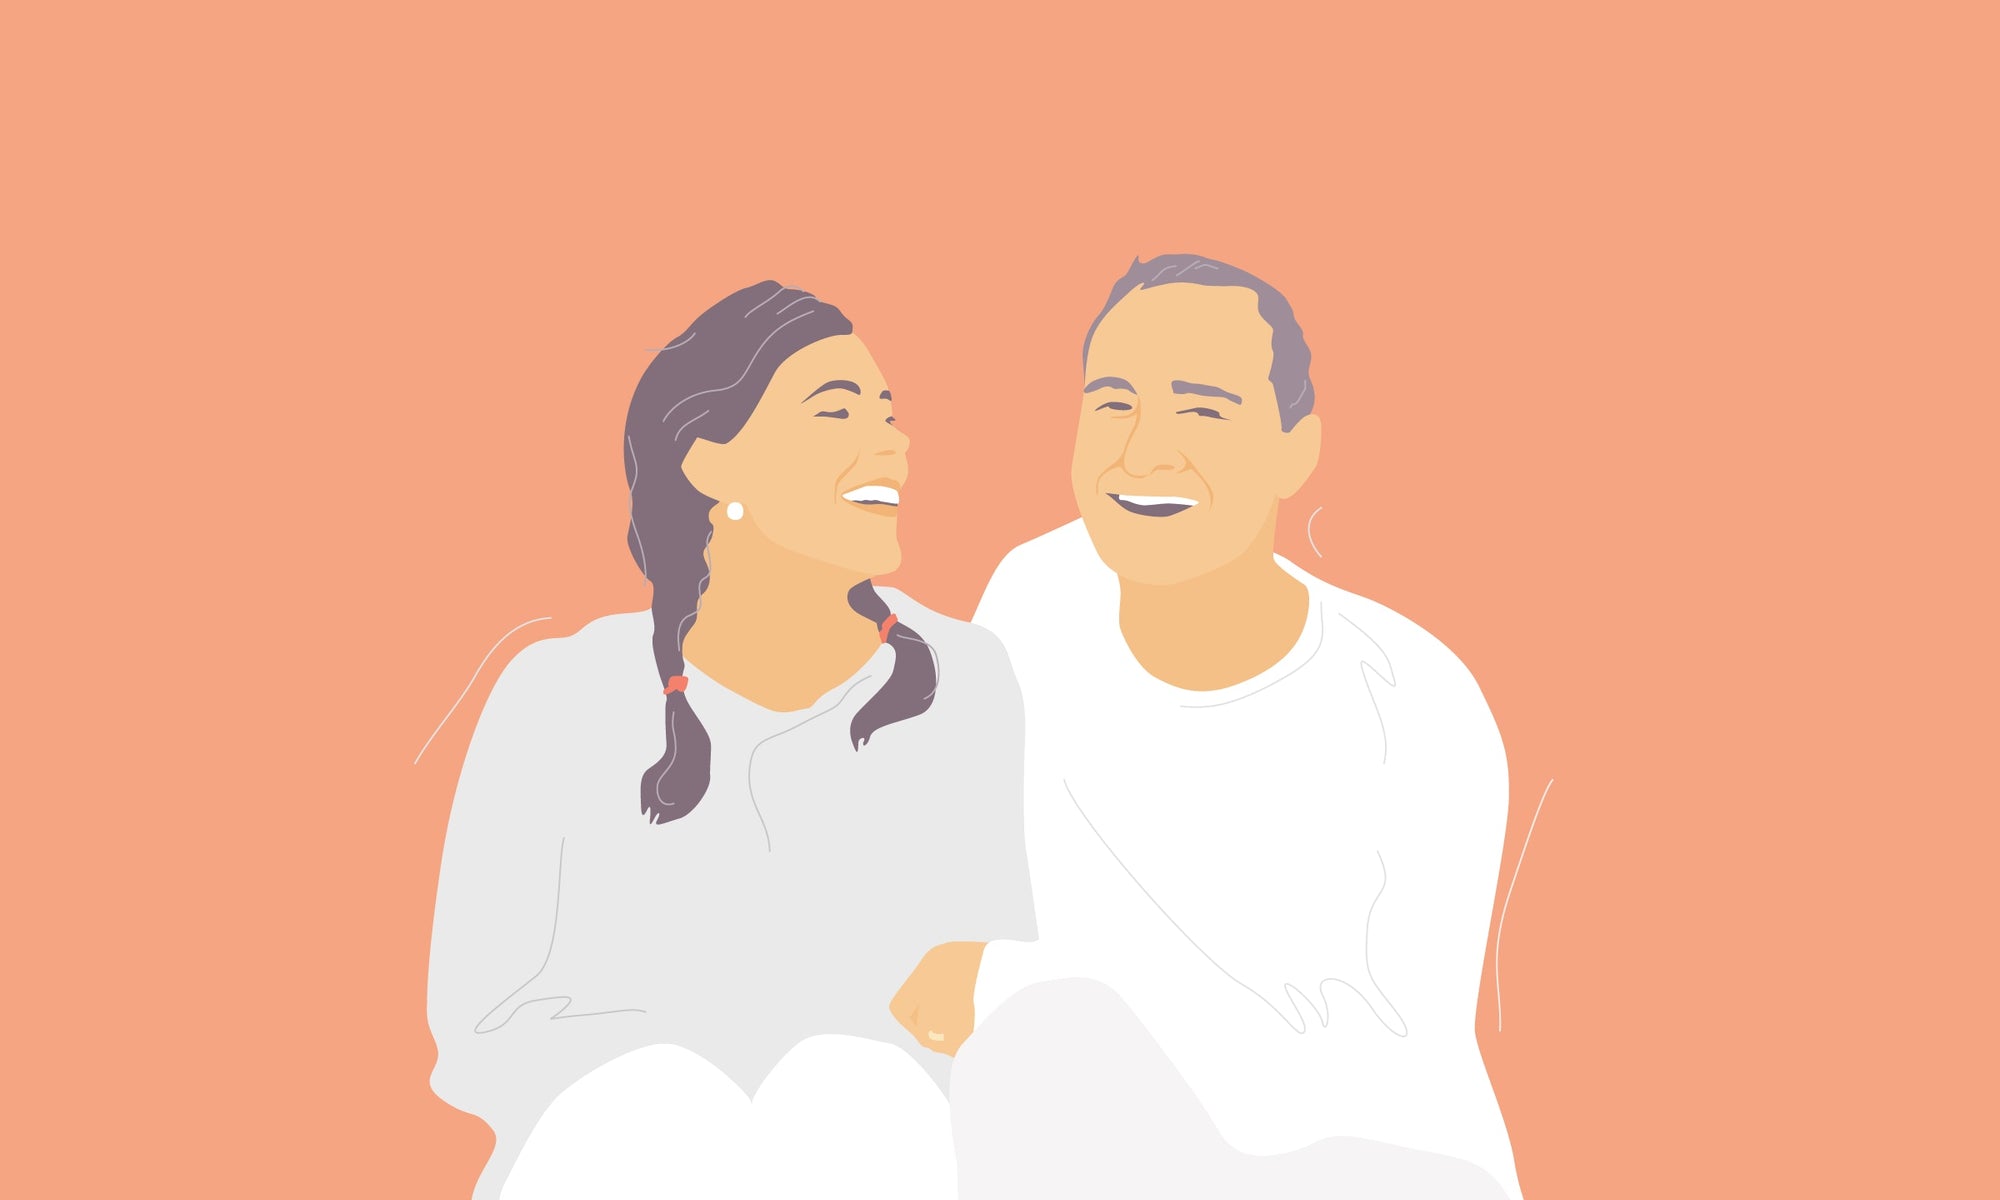 painting of a women and man in white with an orange background